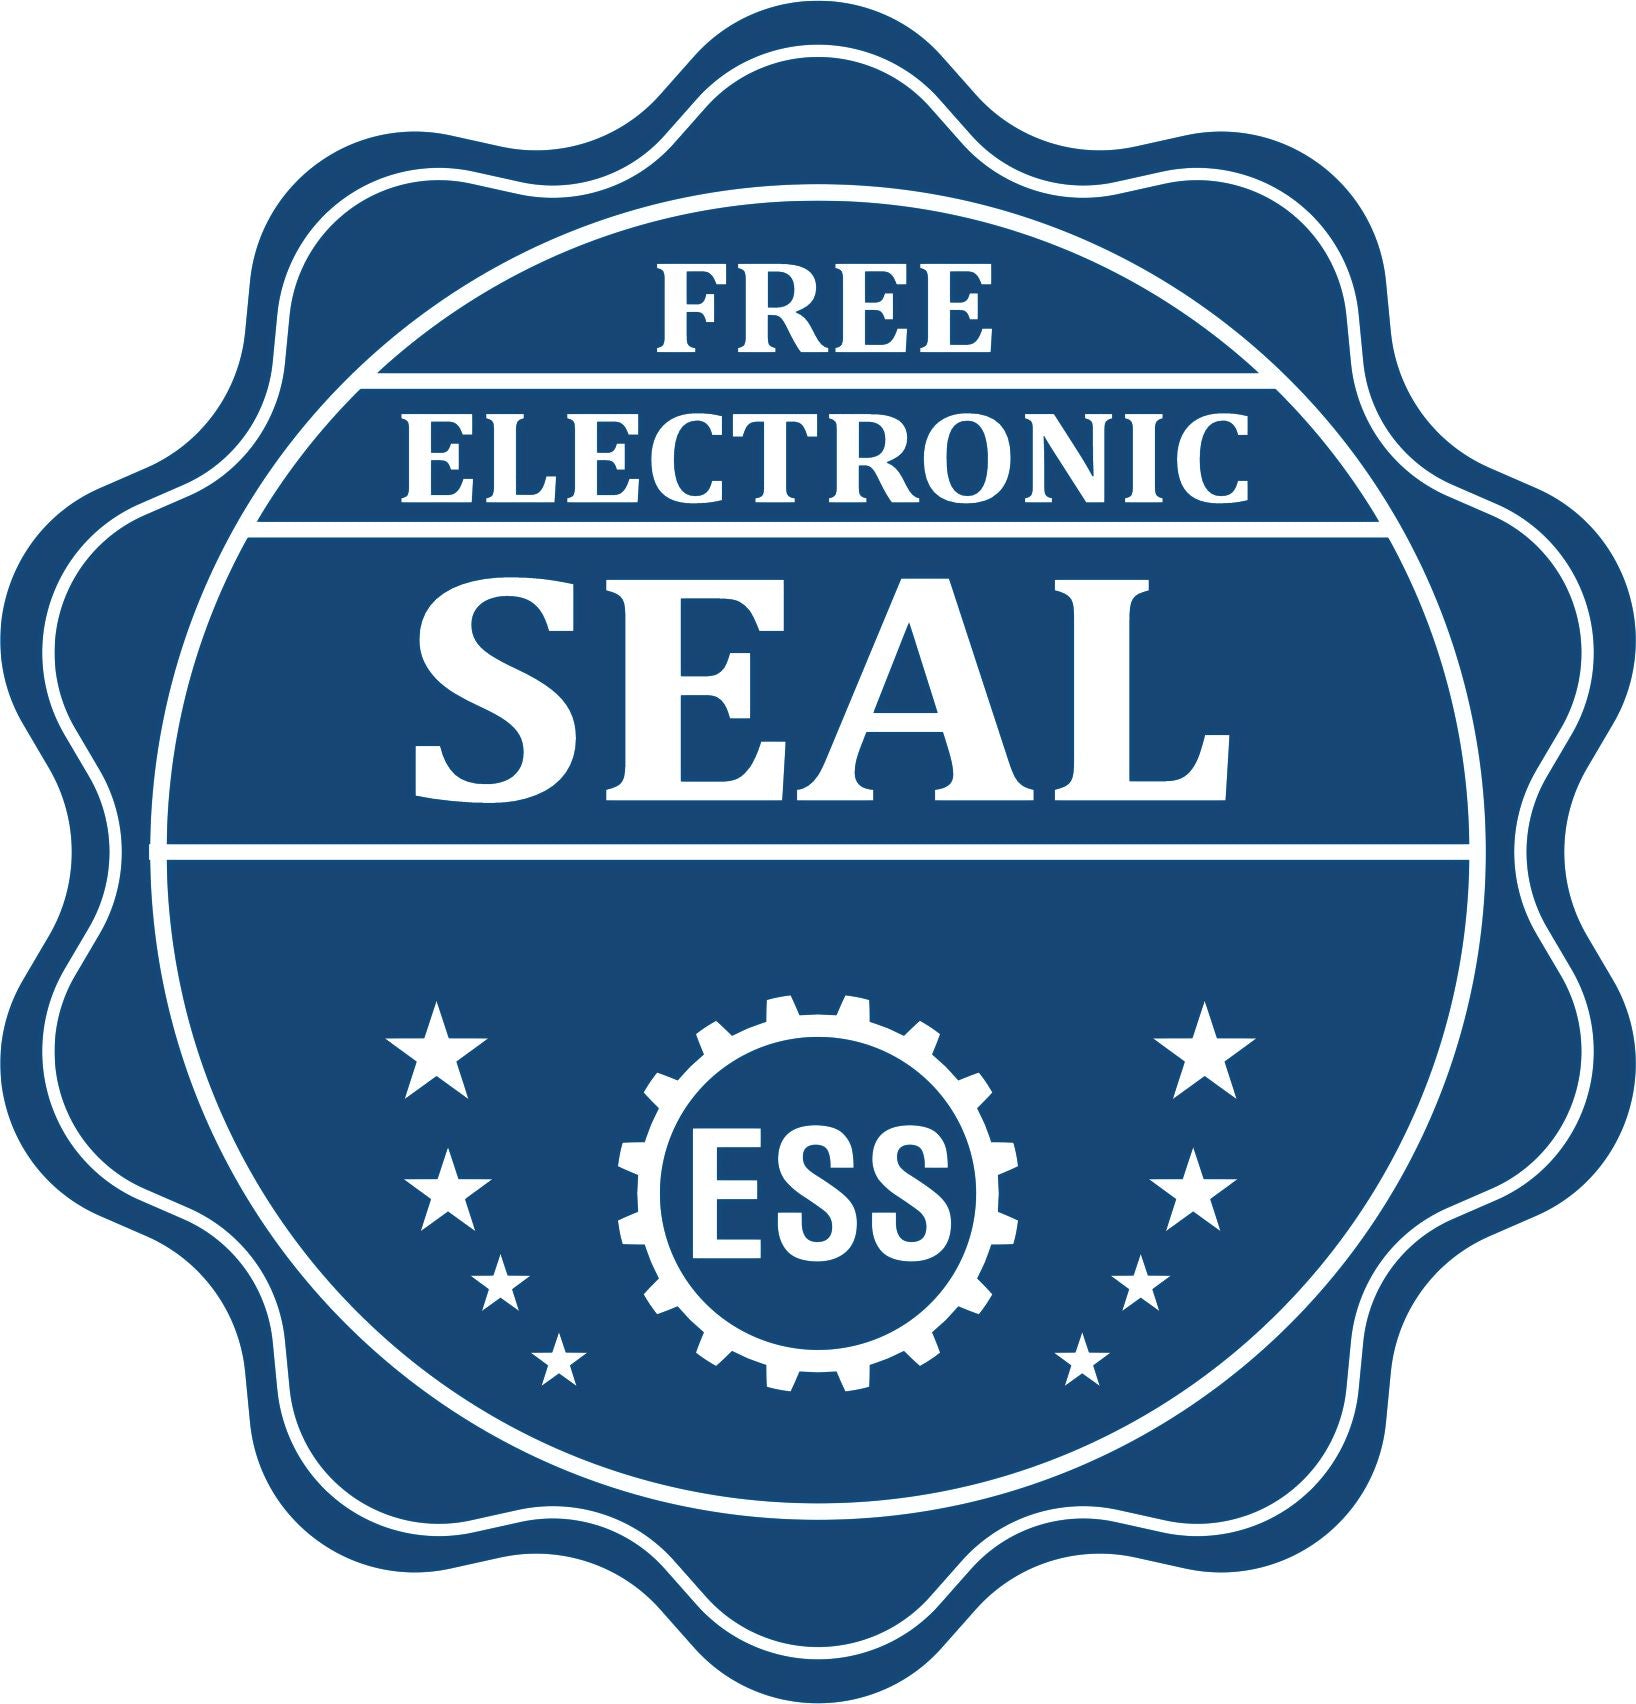 A badge showing a free electronic seal for the Connecticut Long Reach Landscape Architect Embossing Stamp with stars and the ESS gear on the emblem.